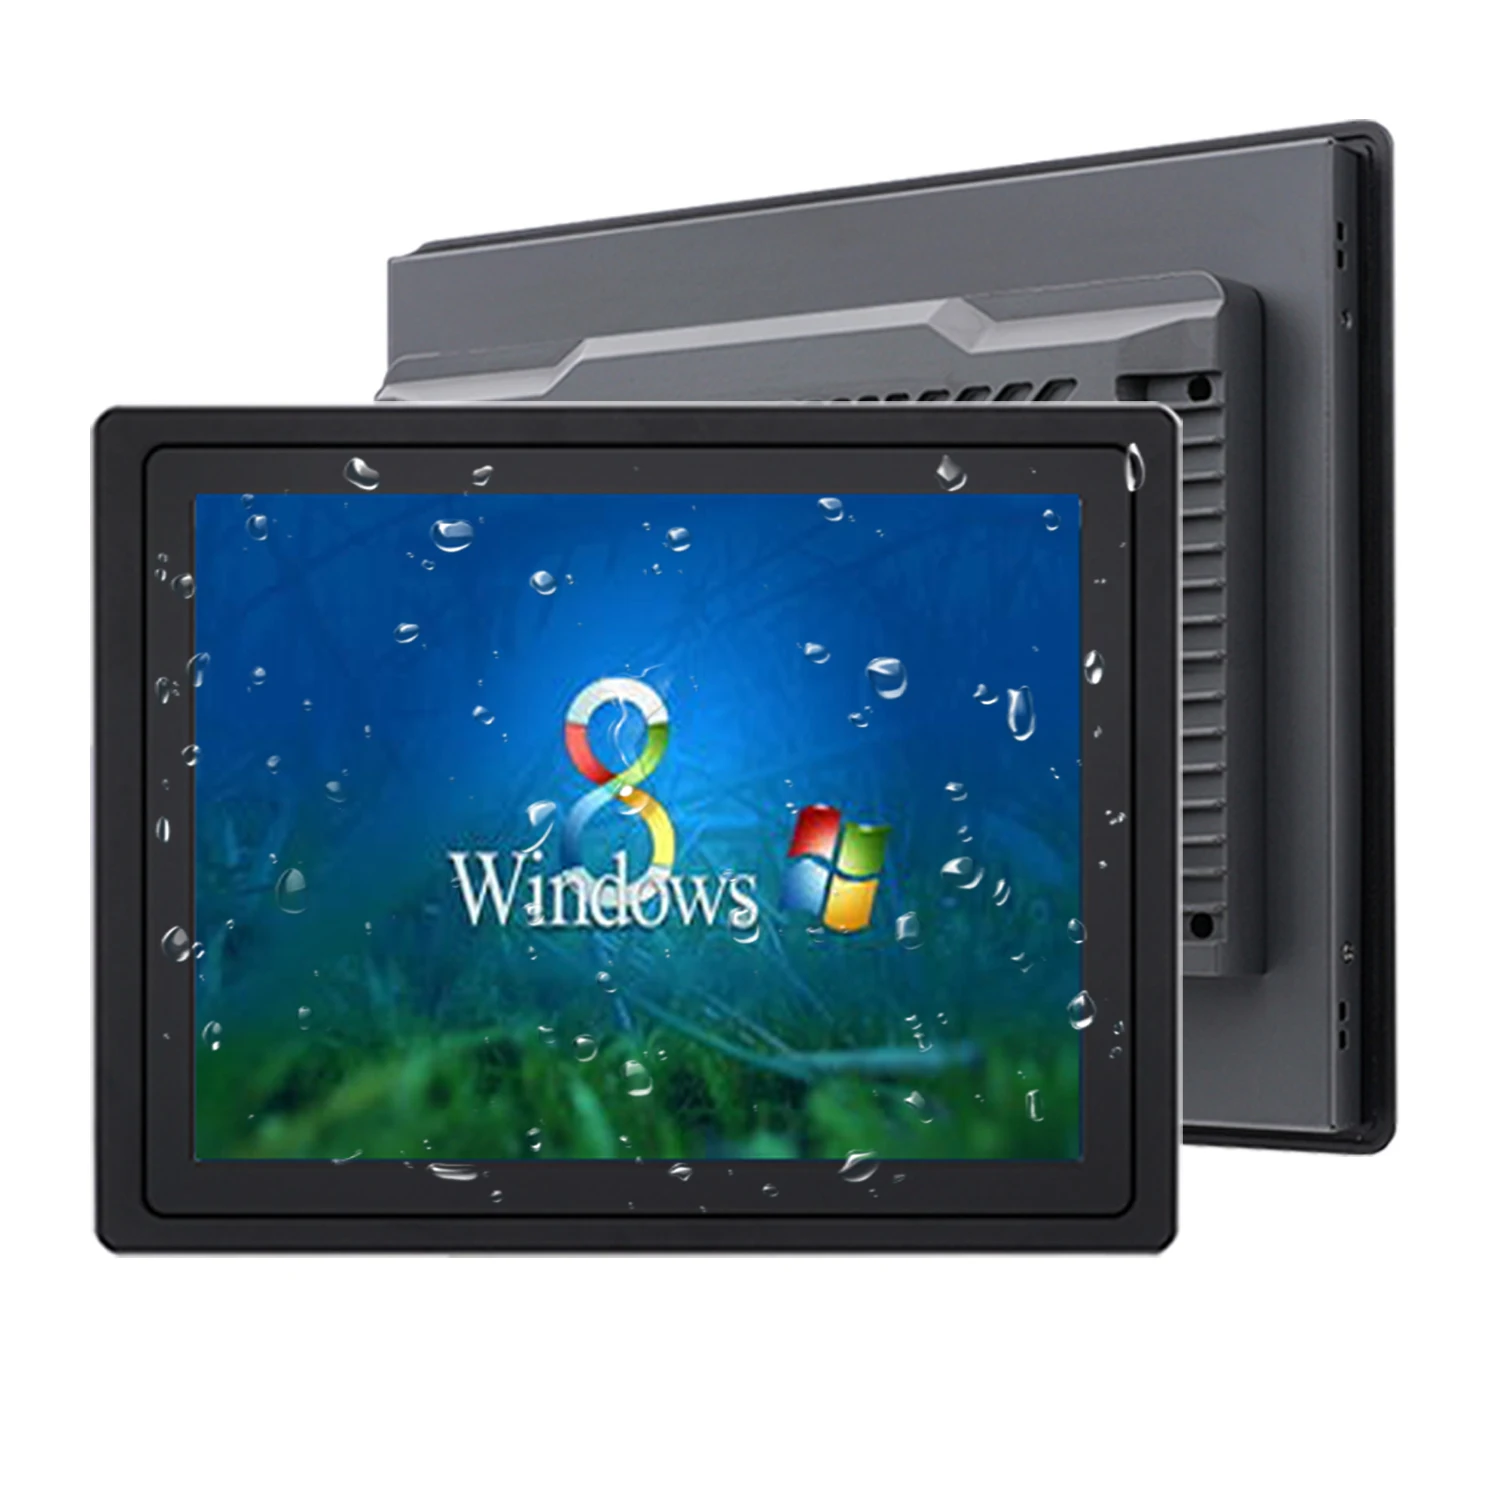 17 19 21.5 inch embedded industrial touch tablet computer Celeron J1800 all-in-one PC with capacitive touch screen for RS232 com